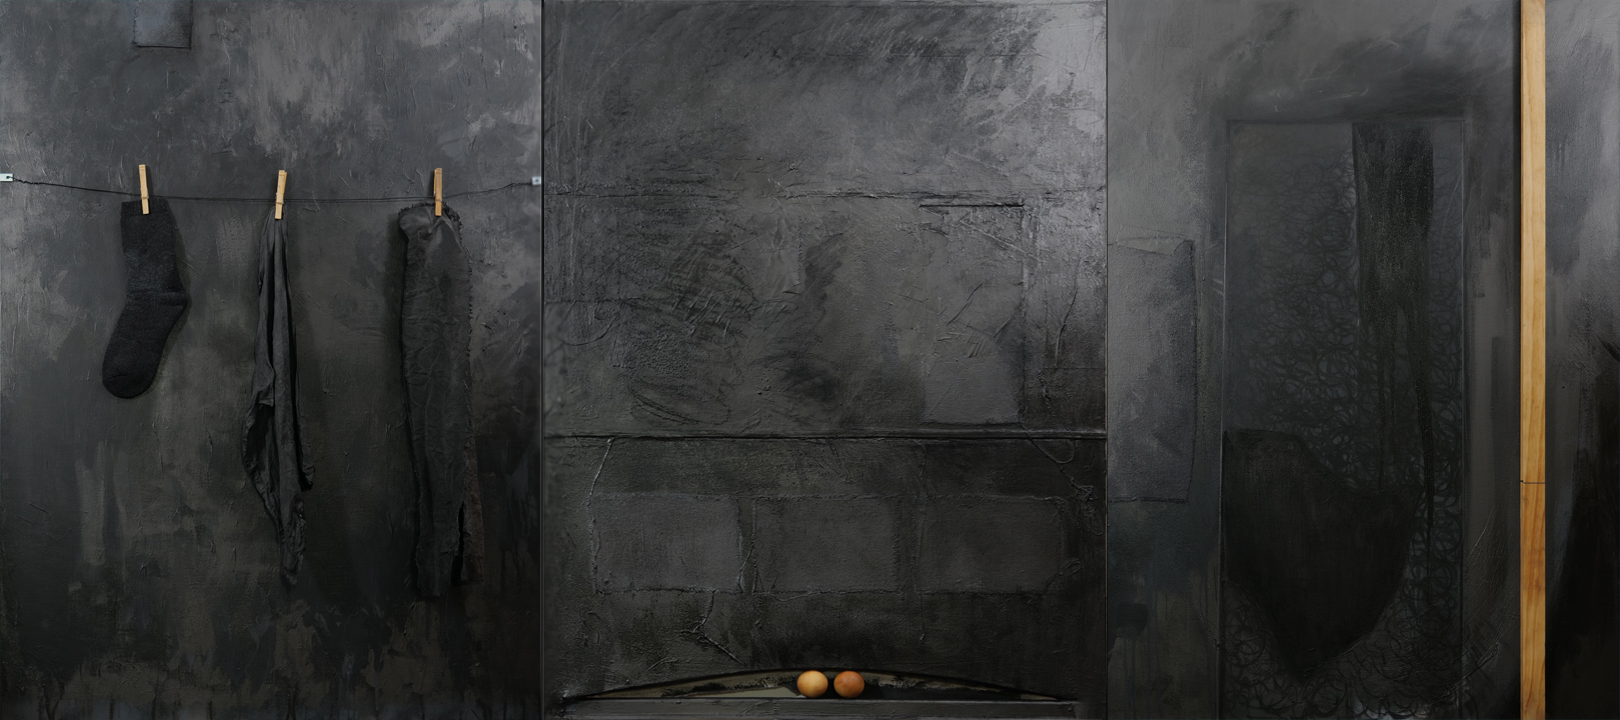 No Exit (Via Negativa, triptych 4), 2022, oil, acrylic, graphite, charcoal and objects on canvas, 48" x 108"